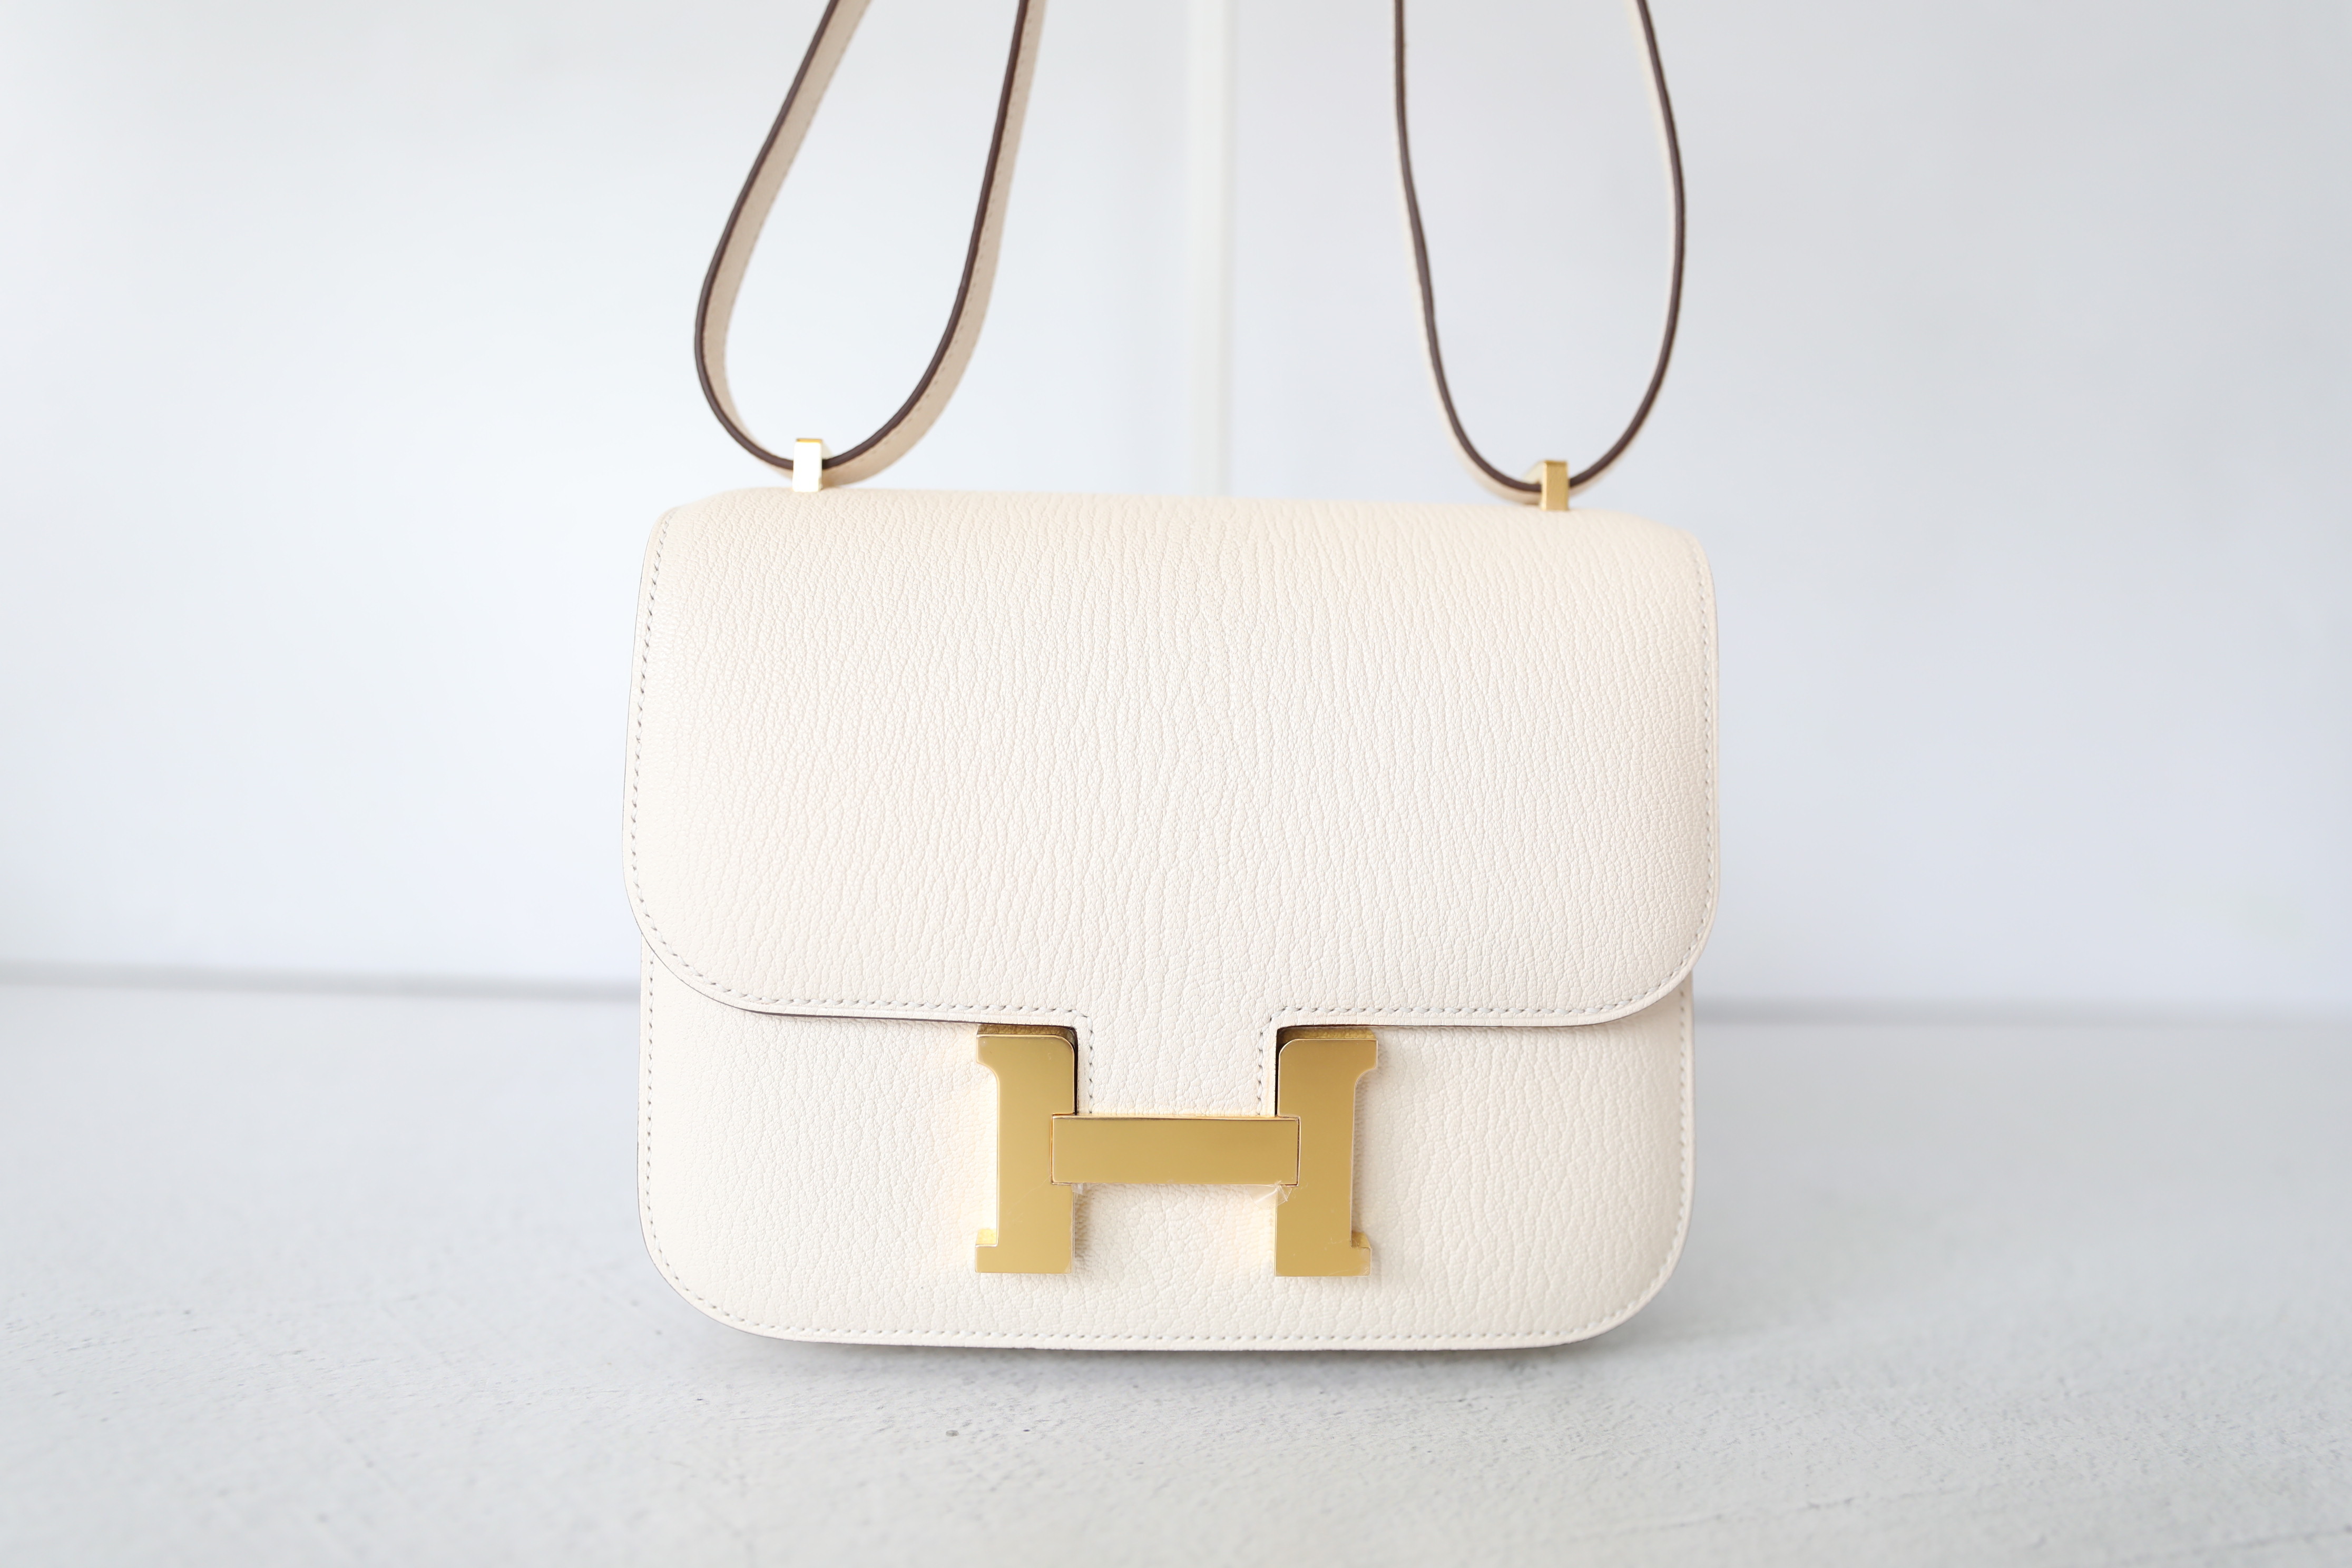 Hermes Constance 18 Reedition, White with Gold Hardware, New in Box WA001 -  Julia Rose Boston